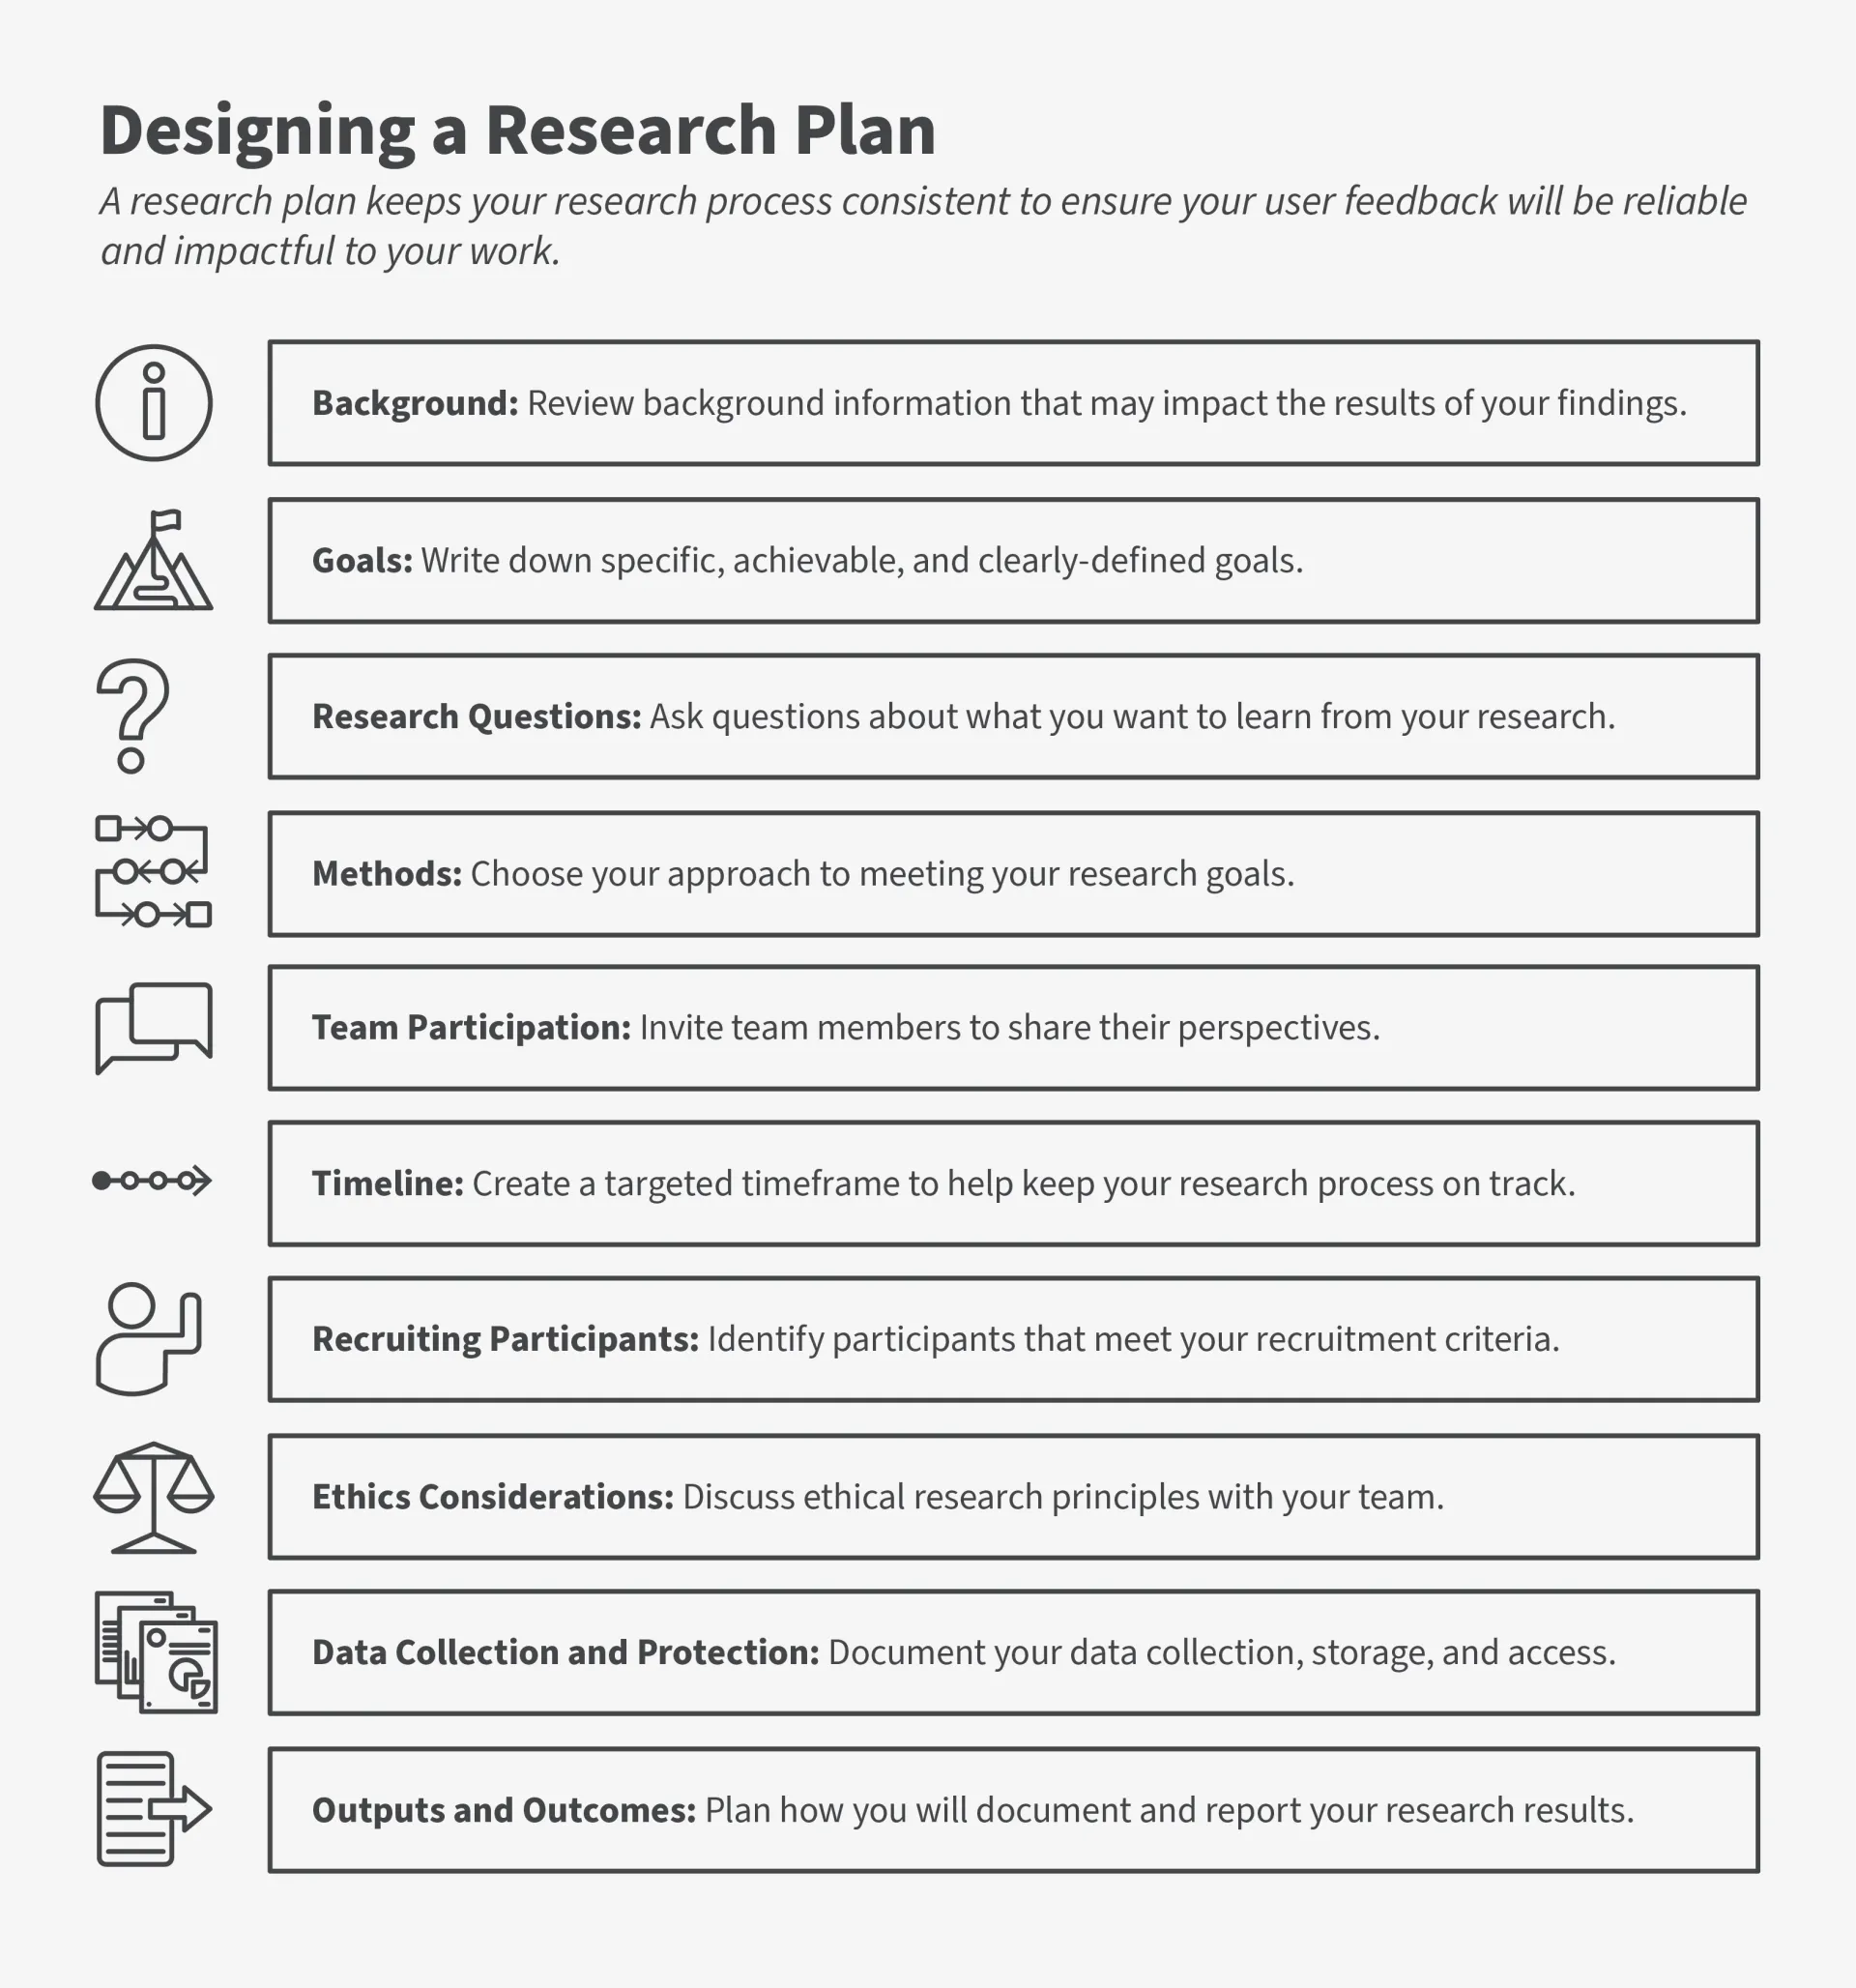 Infographic with ten icons showing what needs to be included in designing a research plan. 